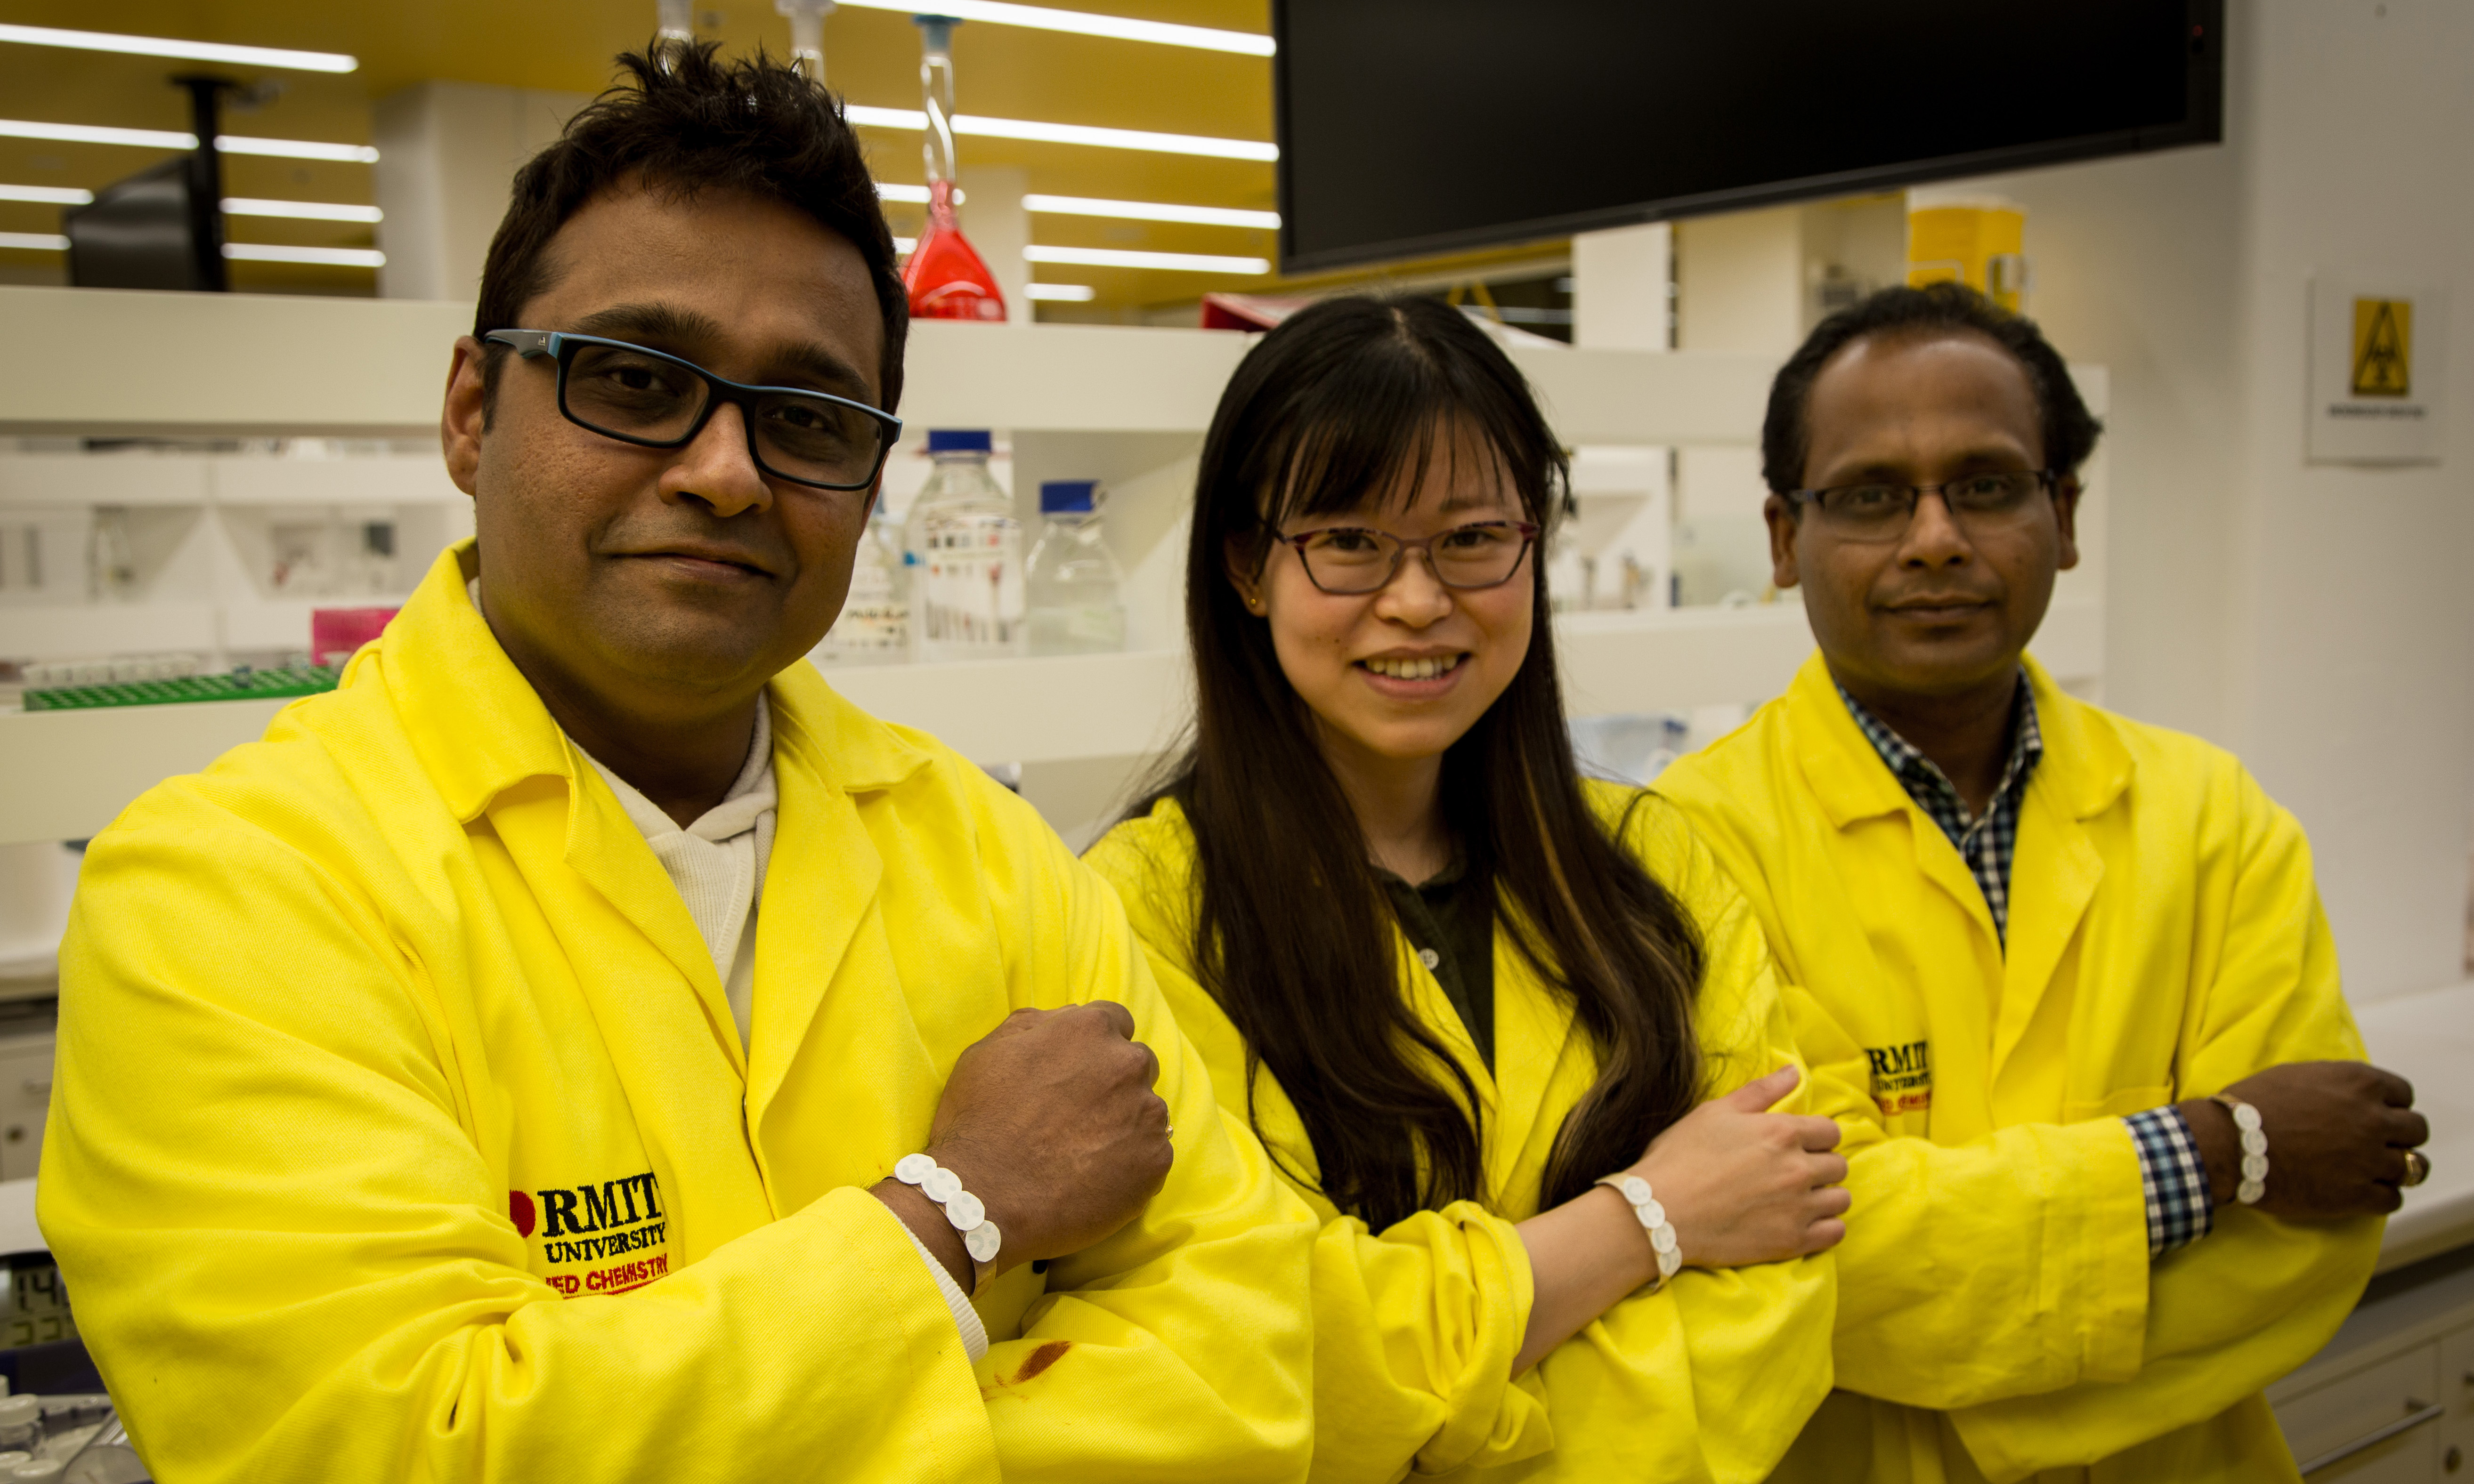 RMIT researchers from the Ian Potter NanoBioSensing Facility wearing prototypes of their UV sensor, from left to right, Dr Rajesh Ramanthan, Dr Wenyue Zou and Professor Vipul Bansal. Credit: RMIT University